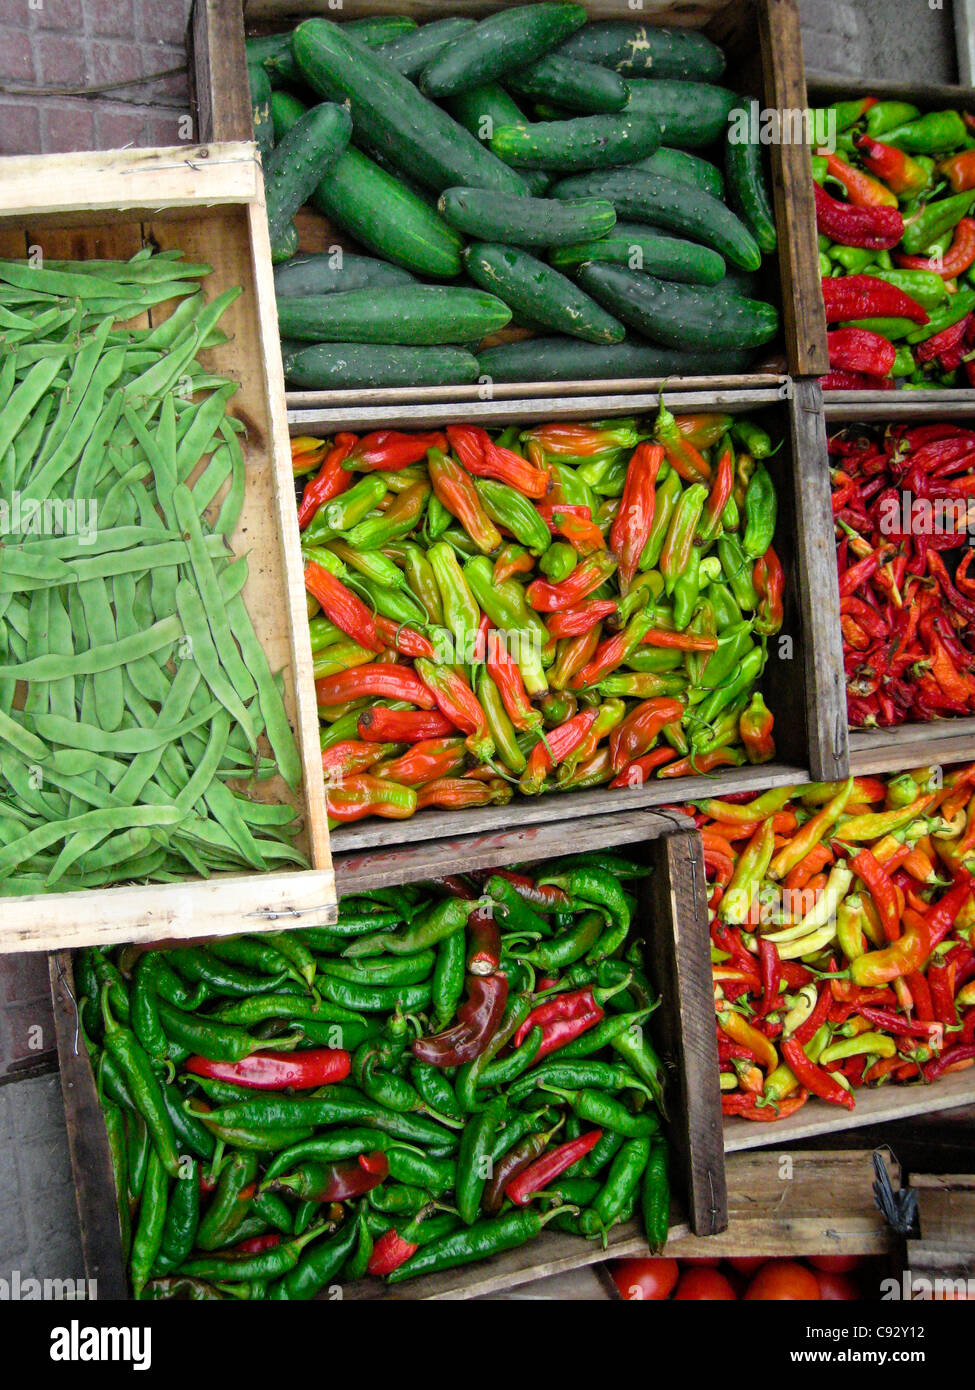 Montevideo, Montevideo, Uruguay Display of green cucumbers, chilies and beans. Stock Photo